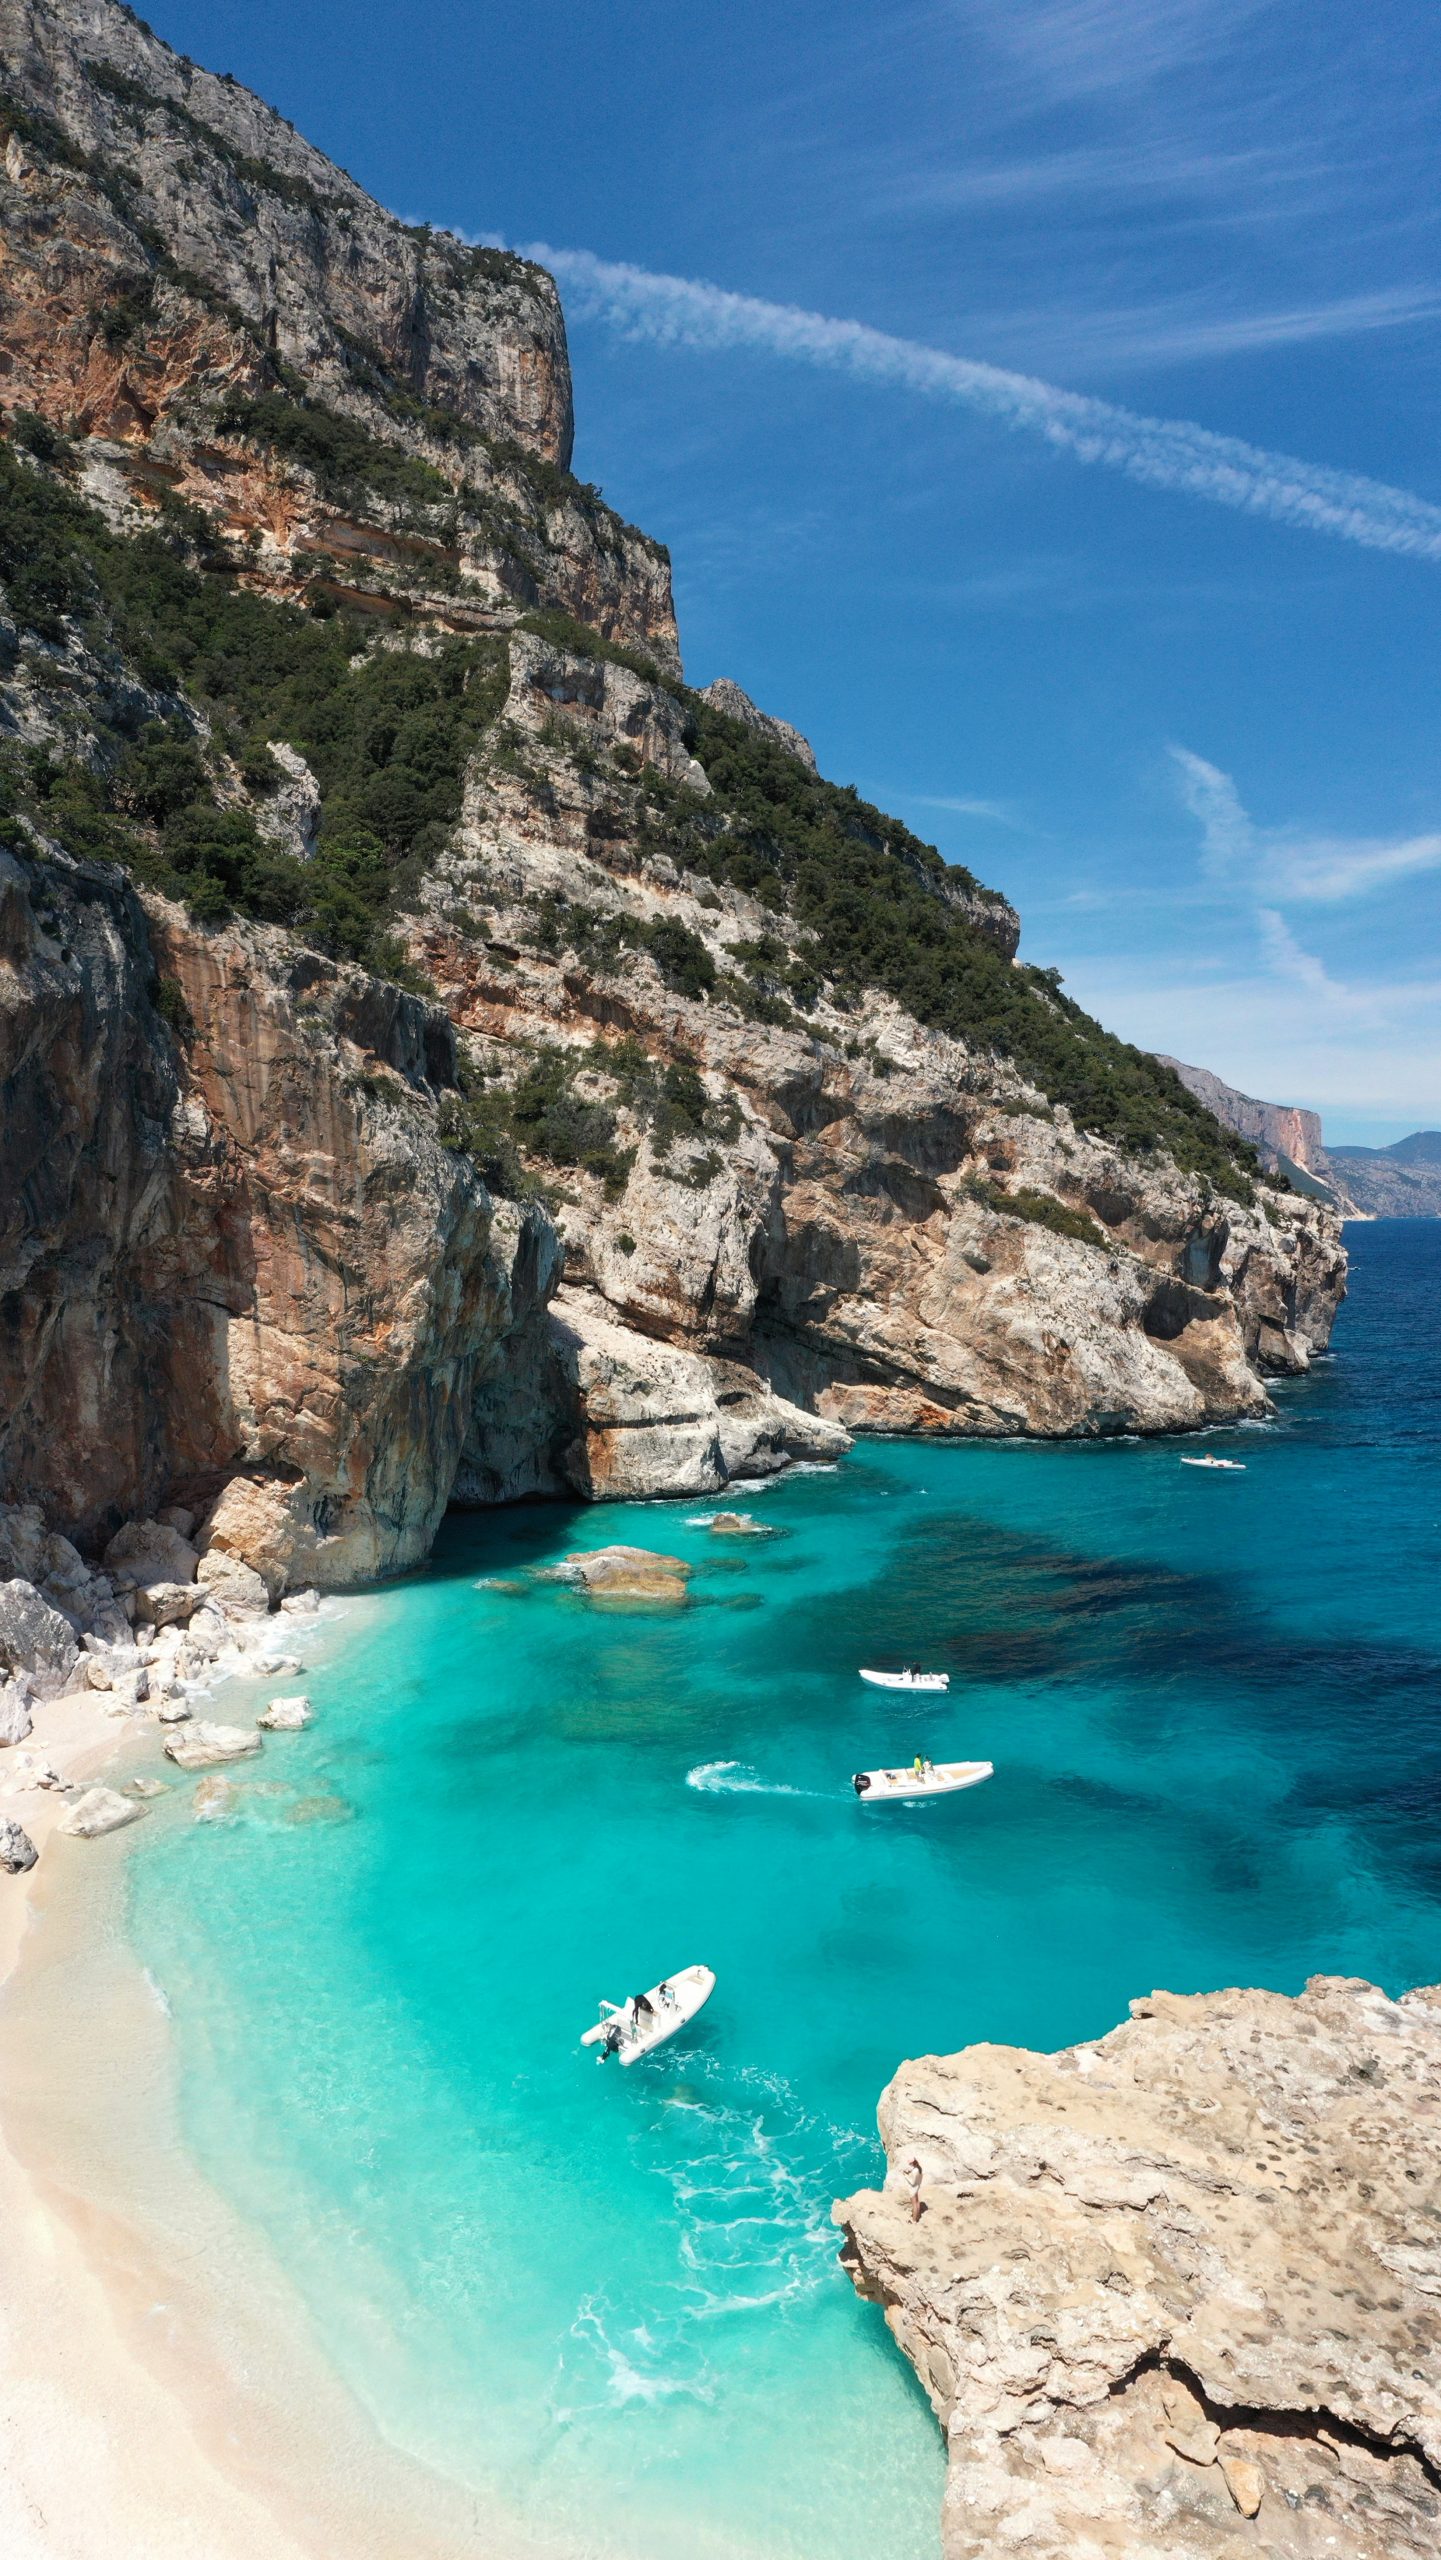 What is the best time of year to visit Sardinia?